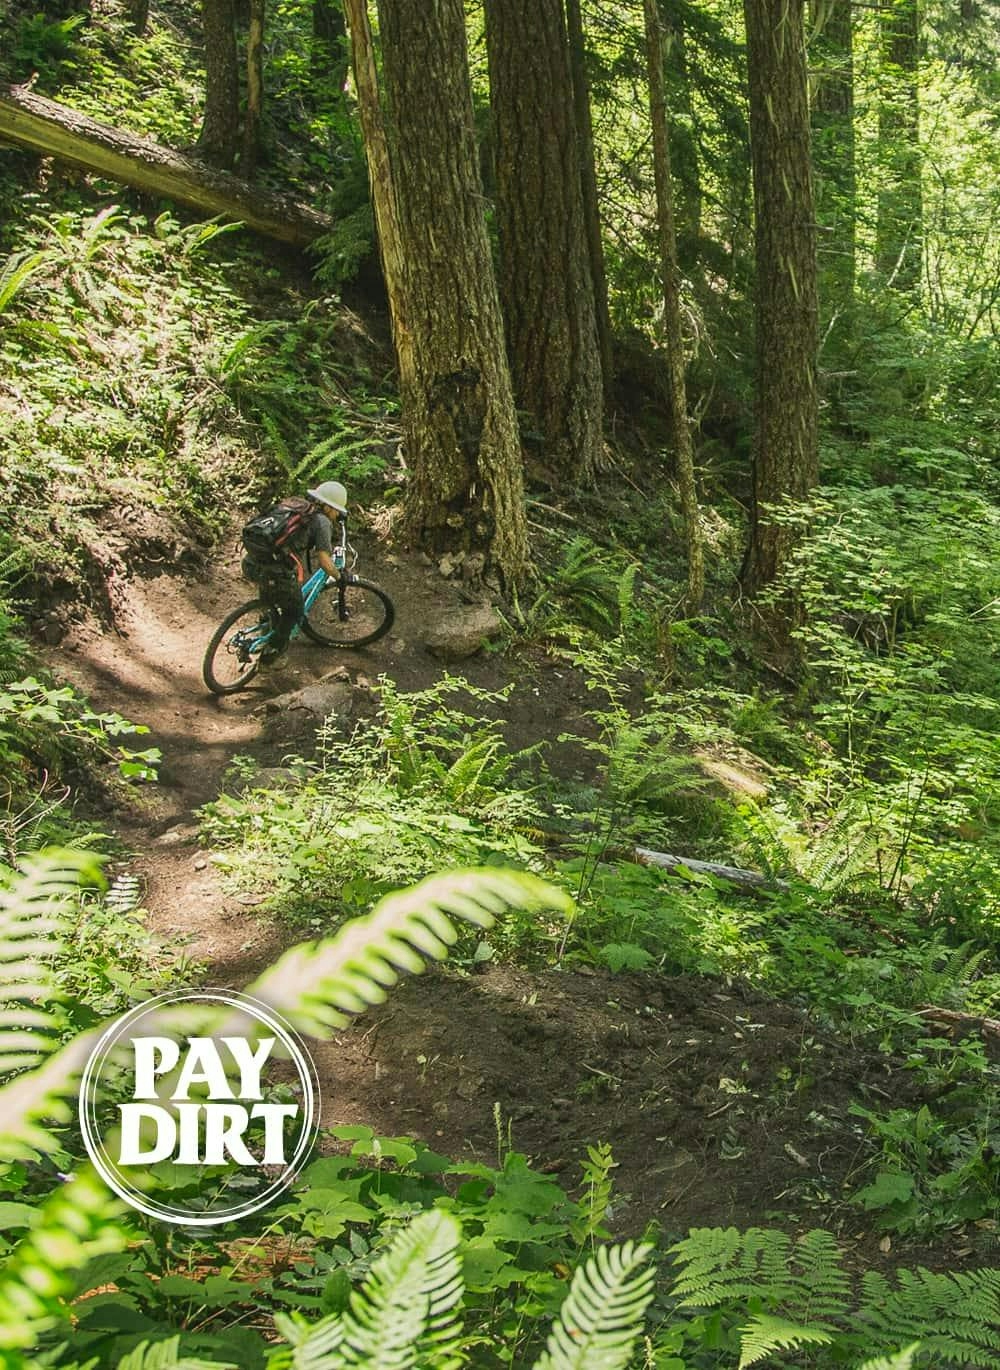 Trail worker riding singletrack in the forest